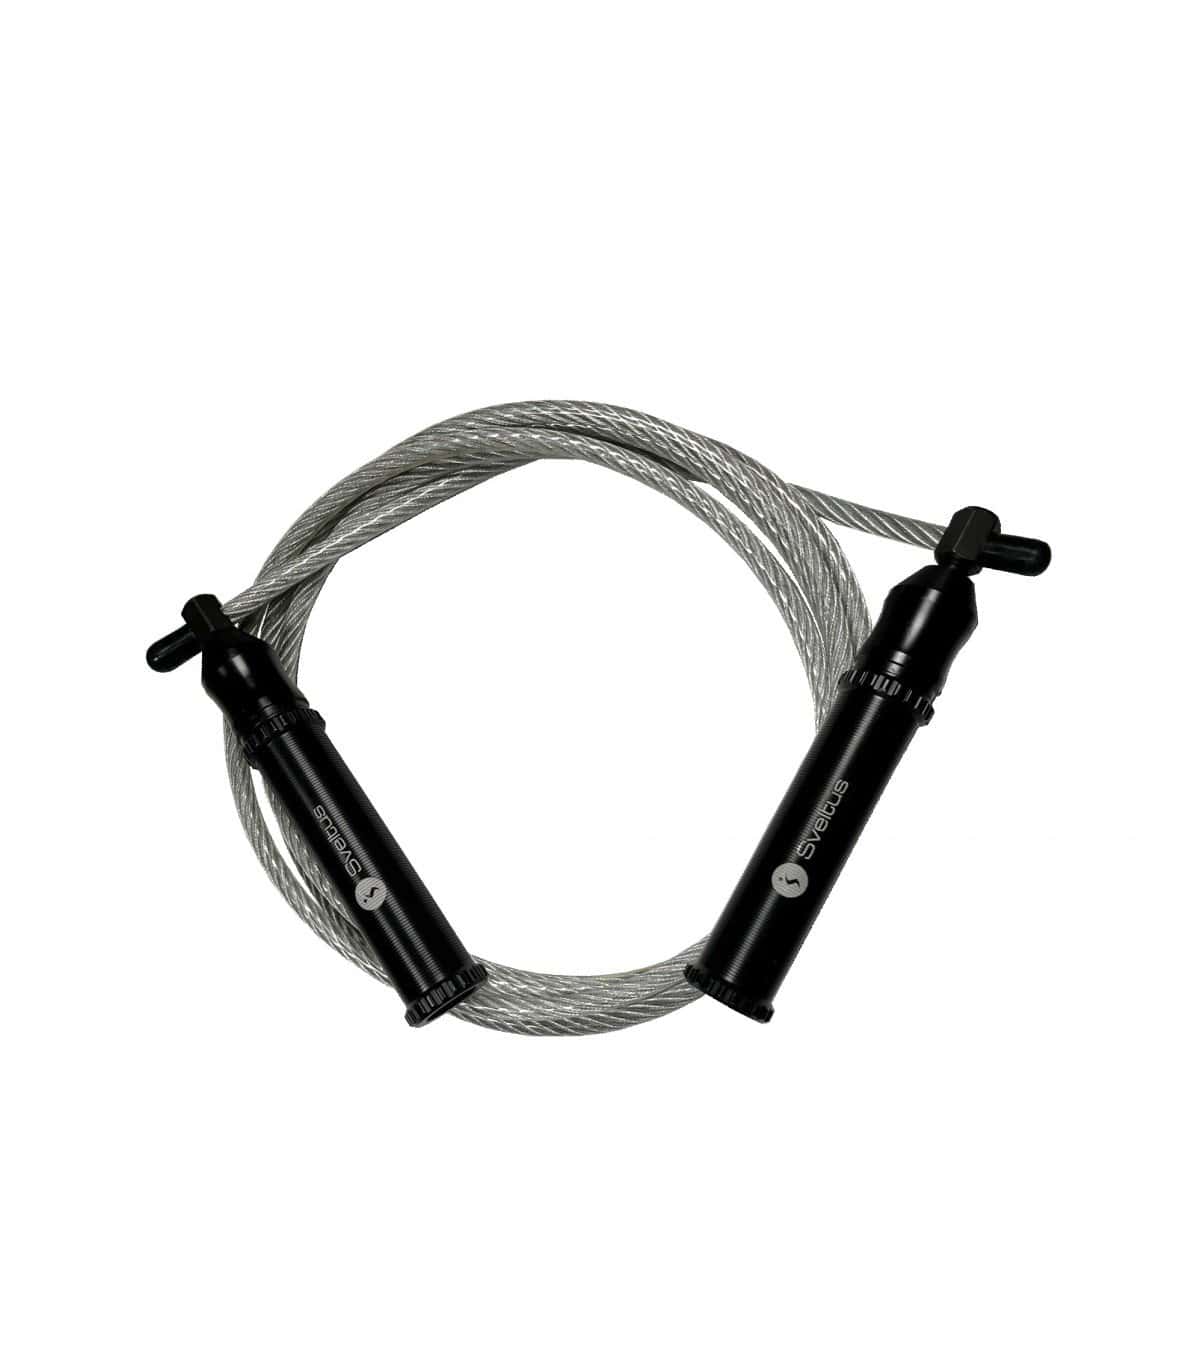 The Sveltus heavy skipping rope is the perfect accessory to work both your cardio and your shoulder muscles.